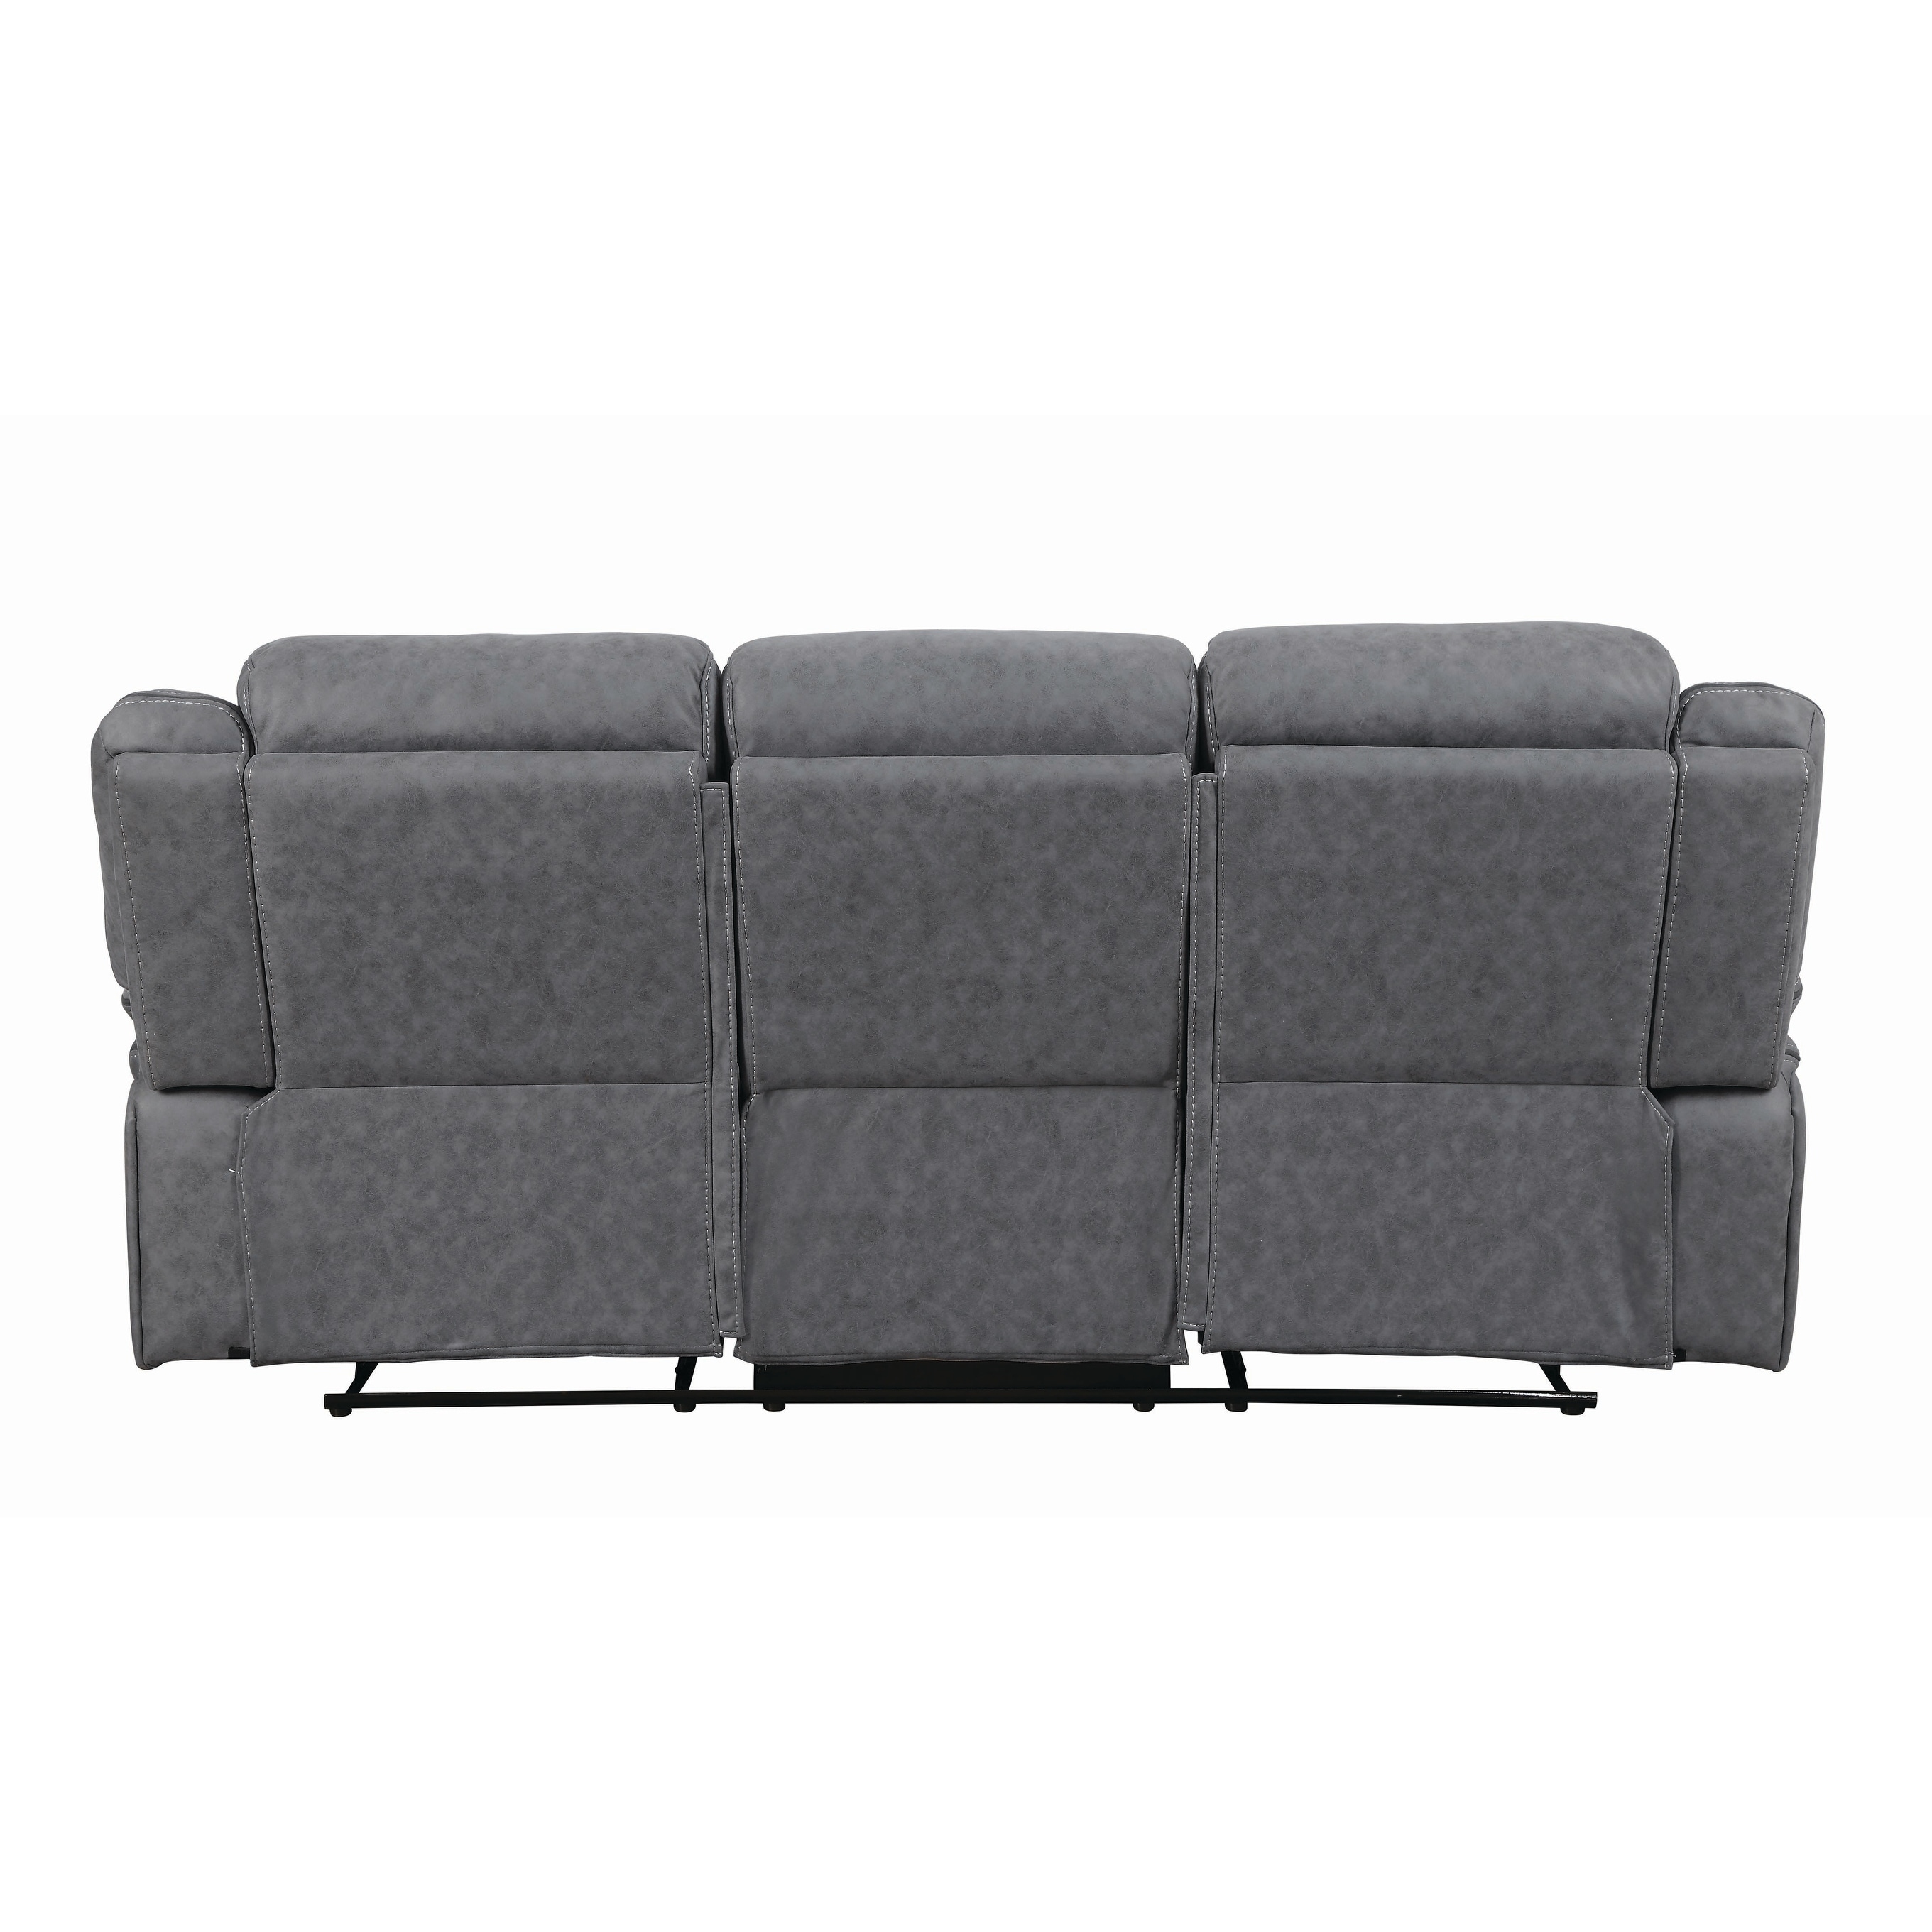 Houston Casual Motion Sofa For Sale Online